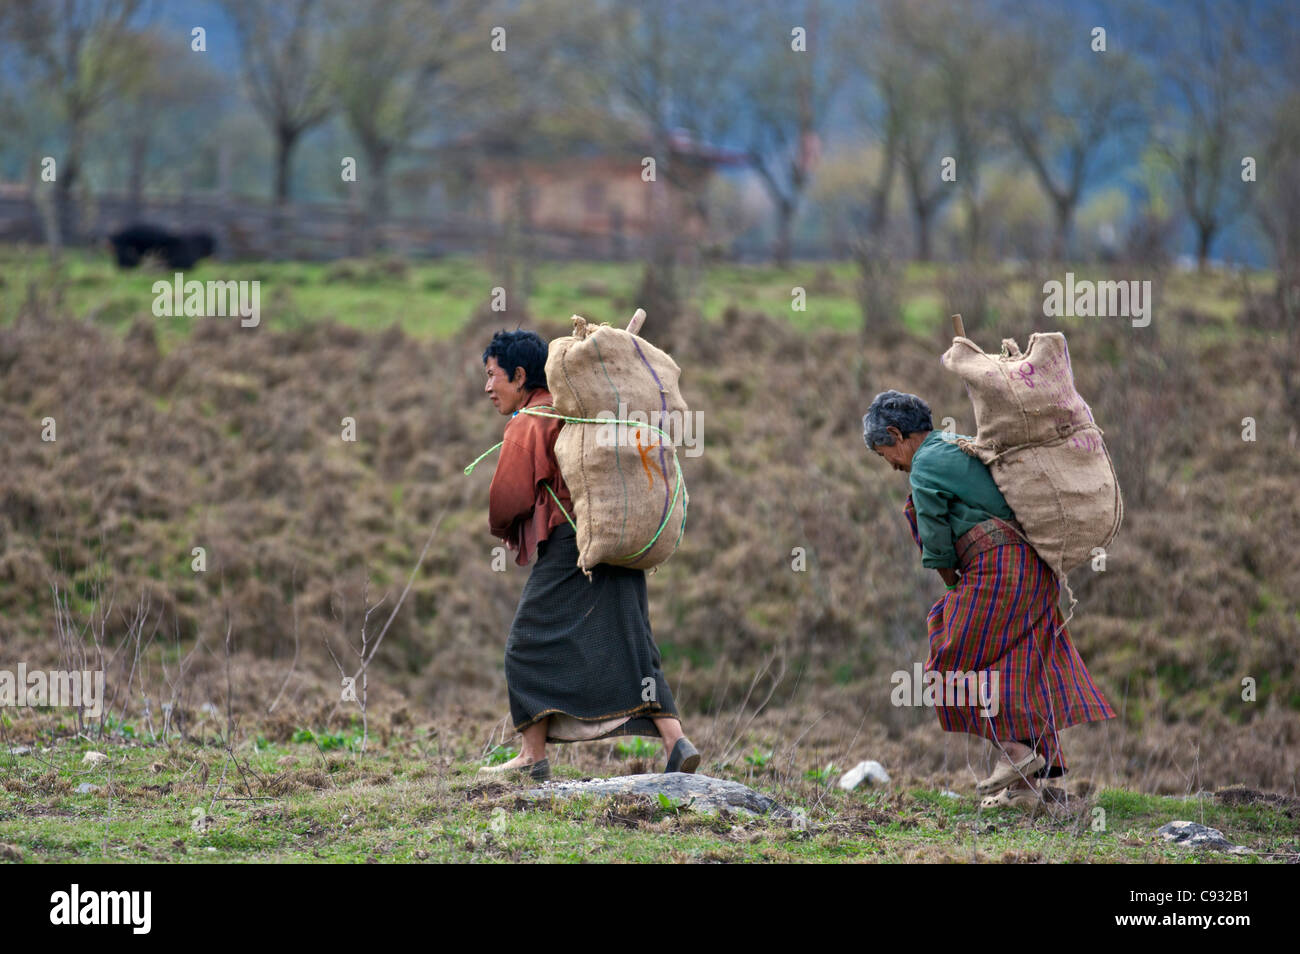 Women return home laden with produce after working in their fields in the fertile Phobjikha Valley. Stock Photo